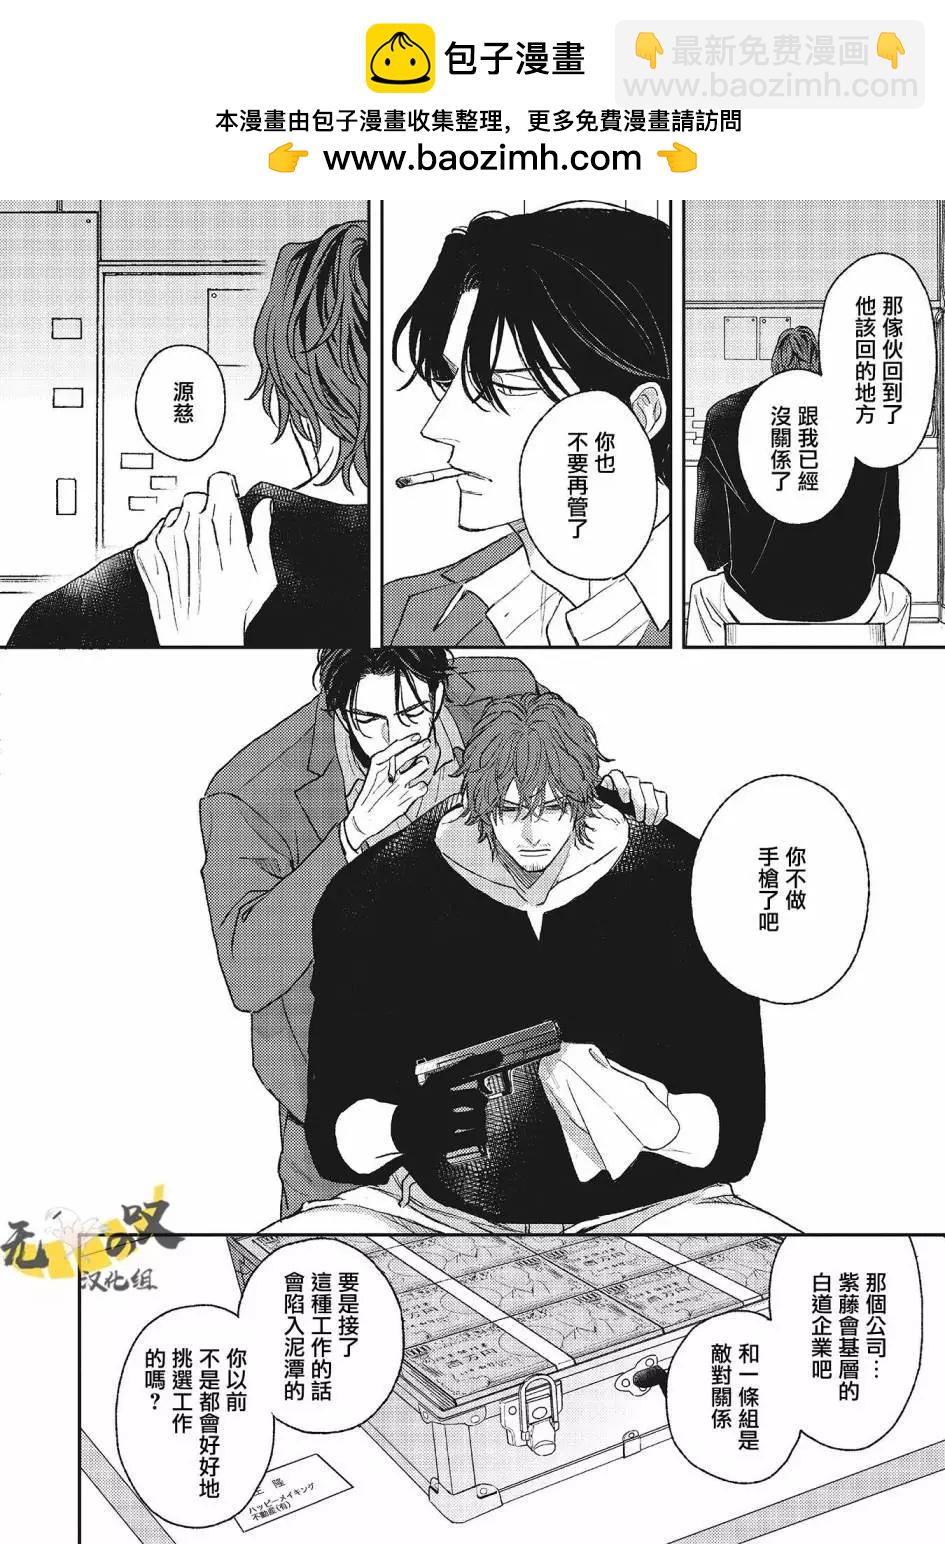 His Little Amber - 第07話 - 2